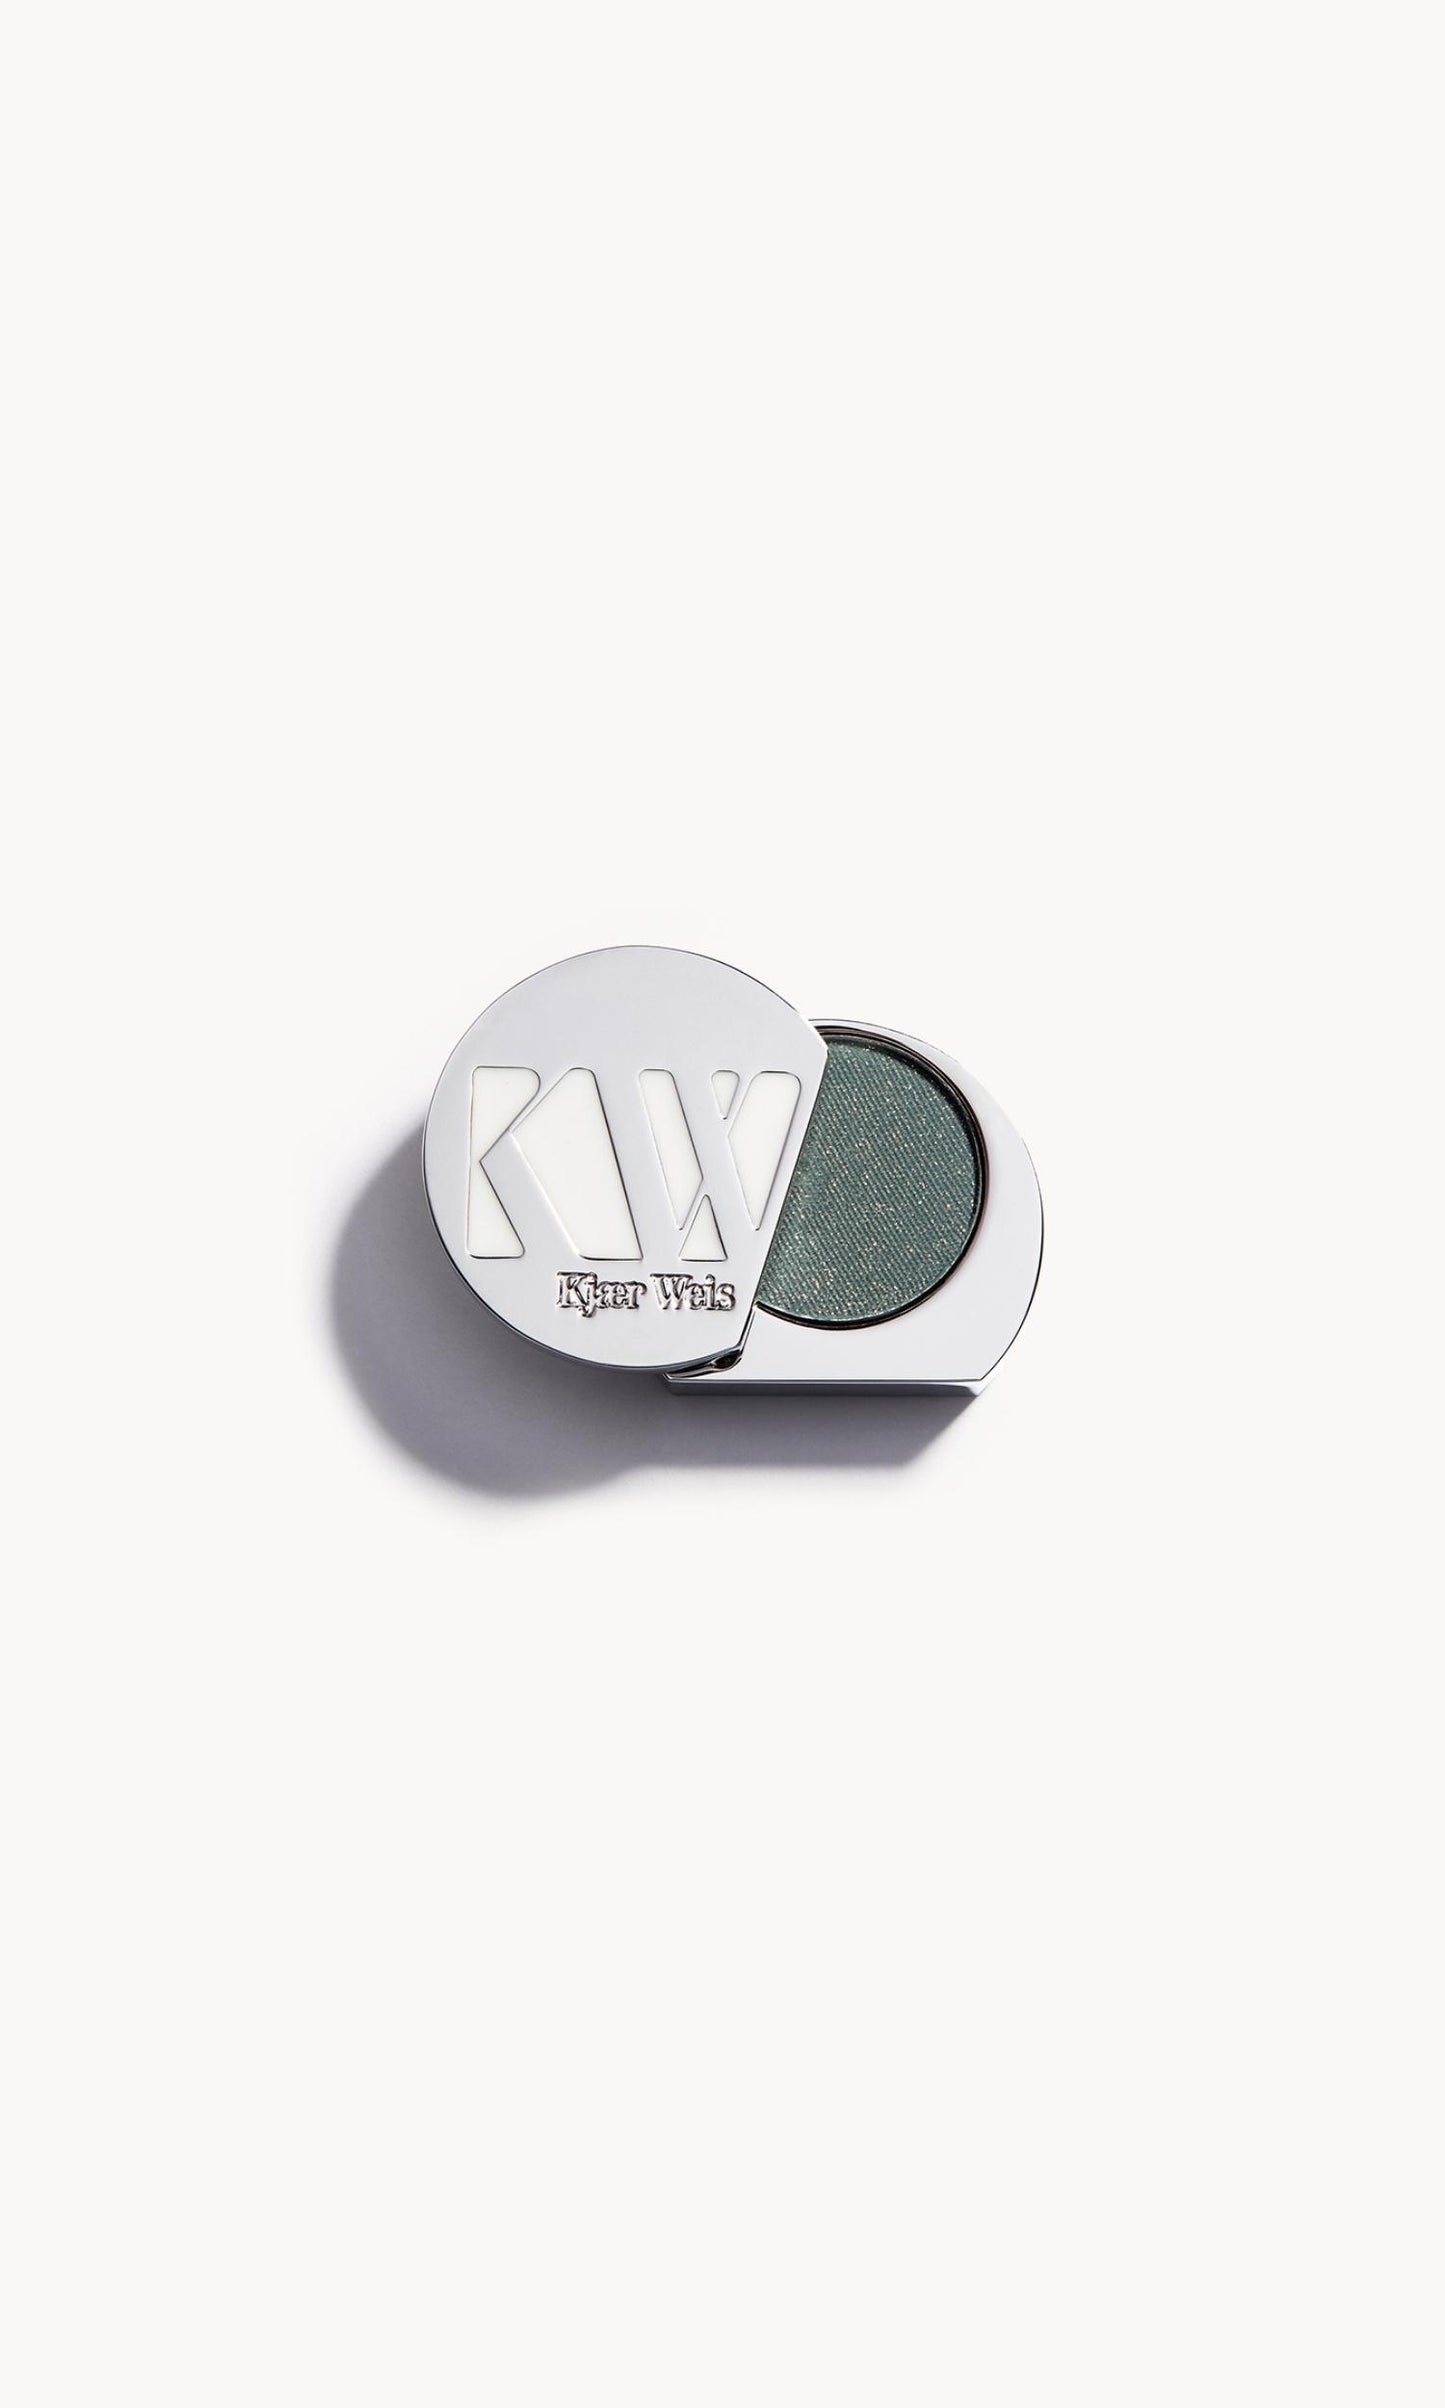 Solid metal KW palette with lid open to show green eye shadow with gold flecks inside